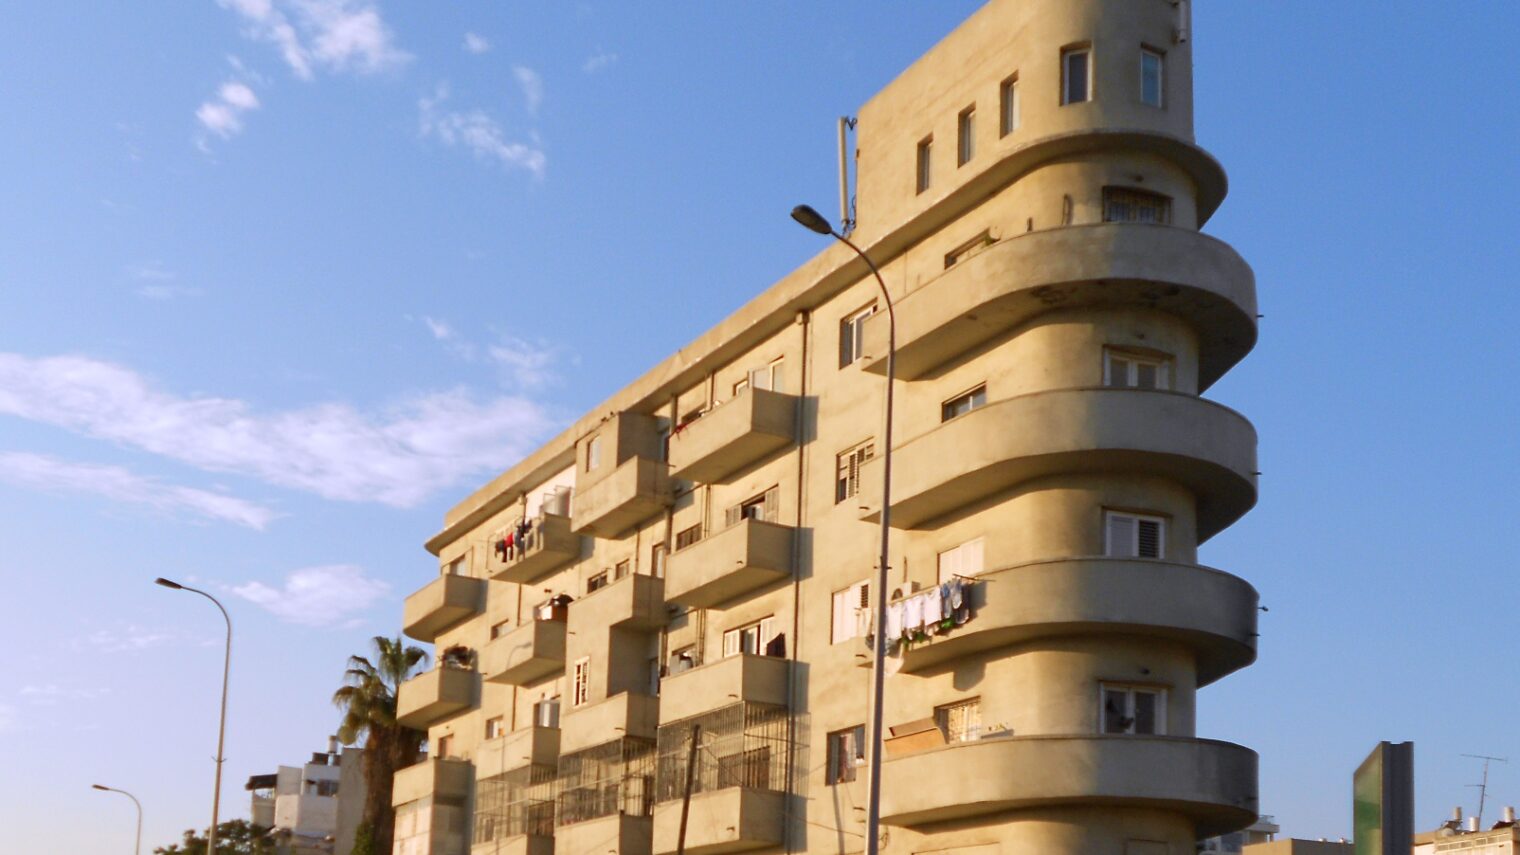 A prominent example of Bauhaus architecture on Levanda St in Tel Aviv. Photo courtesy of the Bauhaus Center